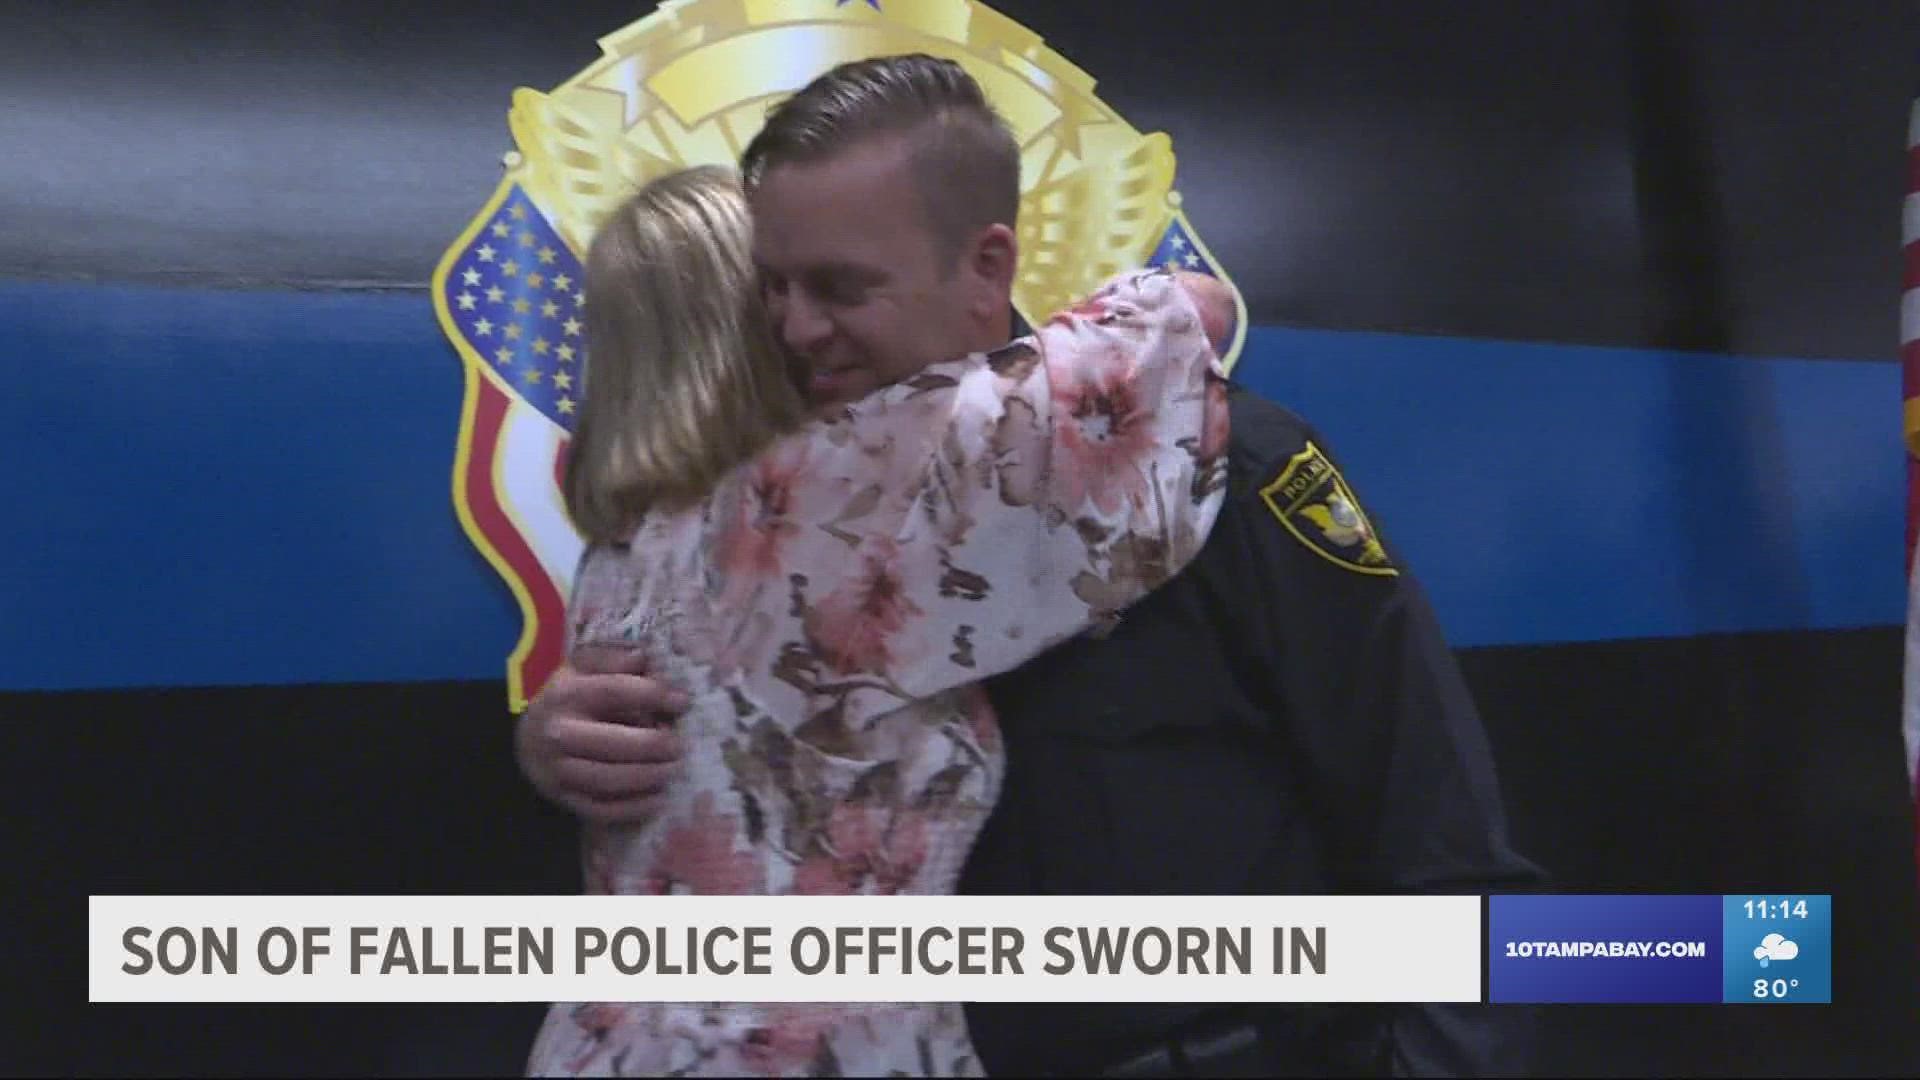 Andrew Kondek never intended on going into law enforcement until after his father, a 21-year veteran of the police force, was killed in the line of duty.